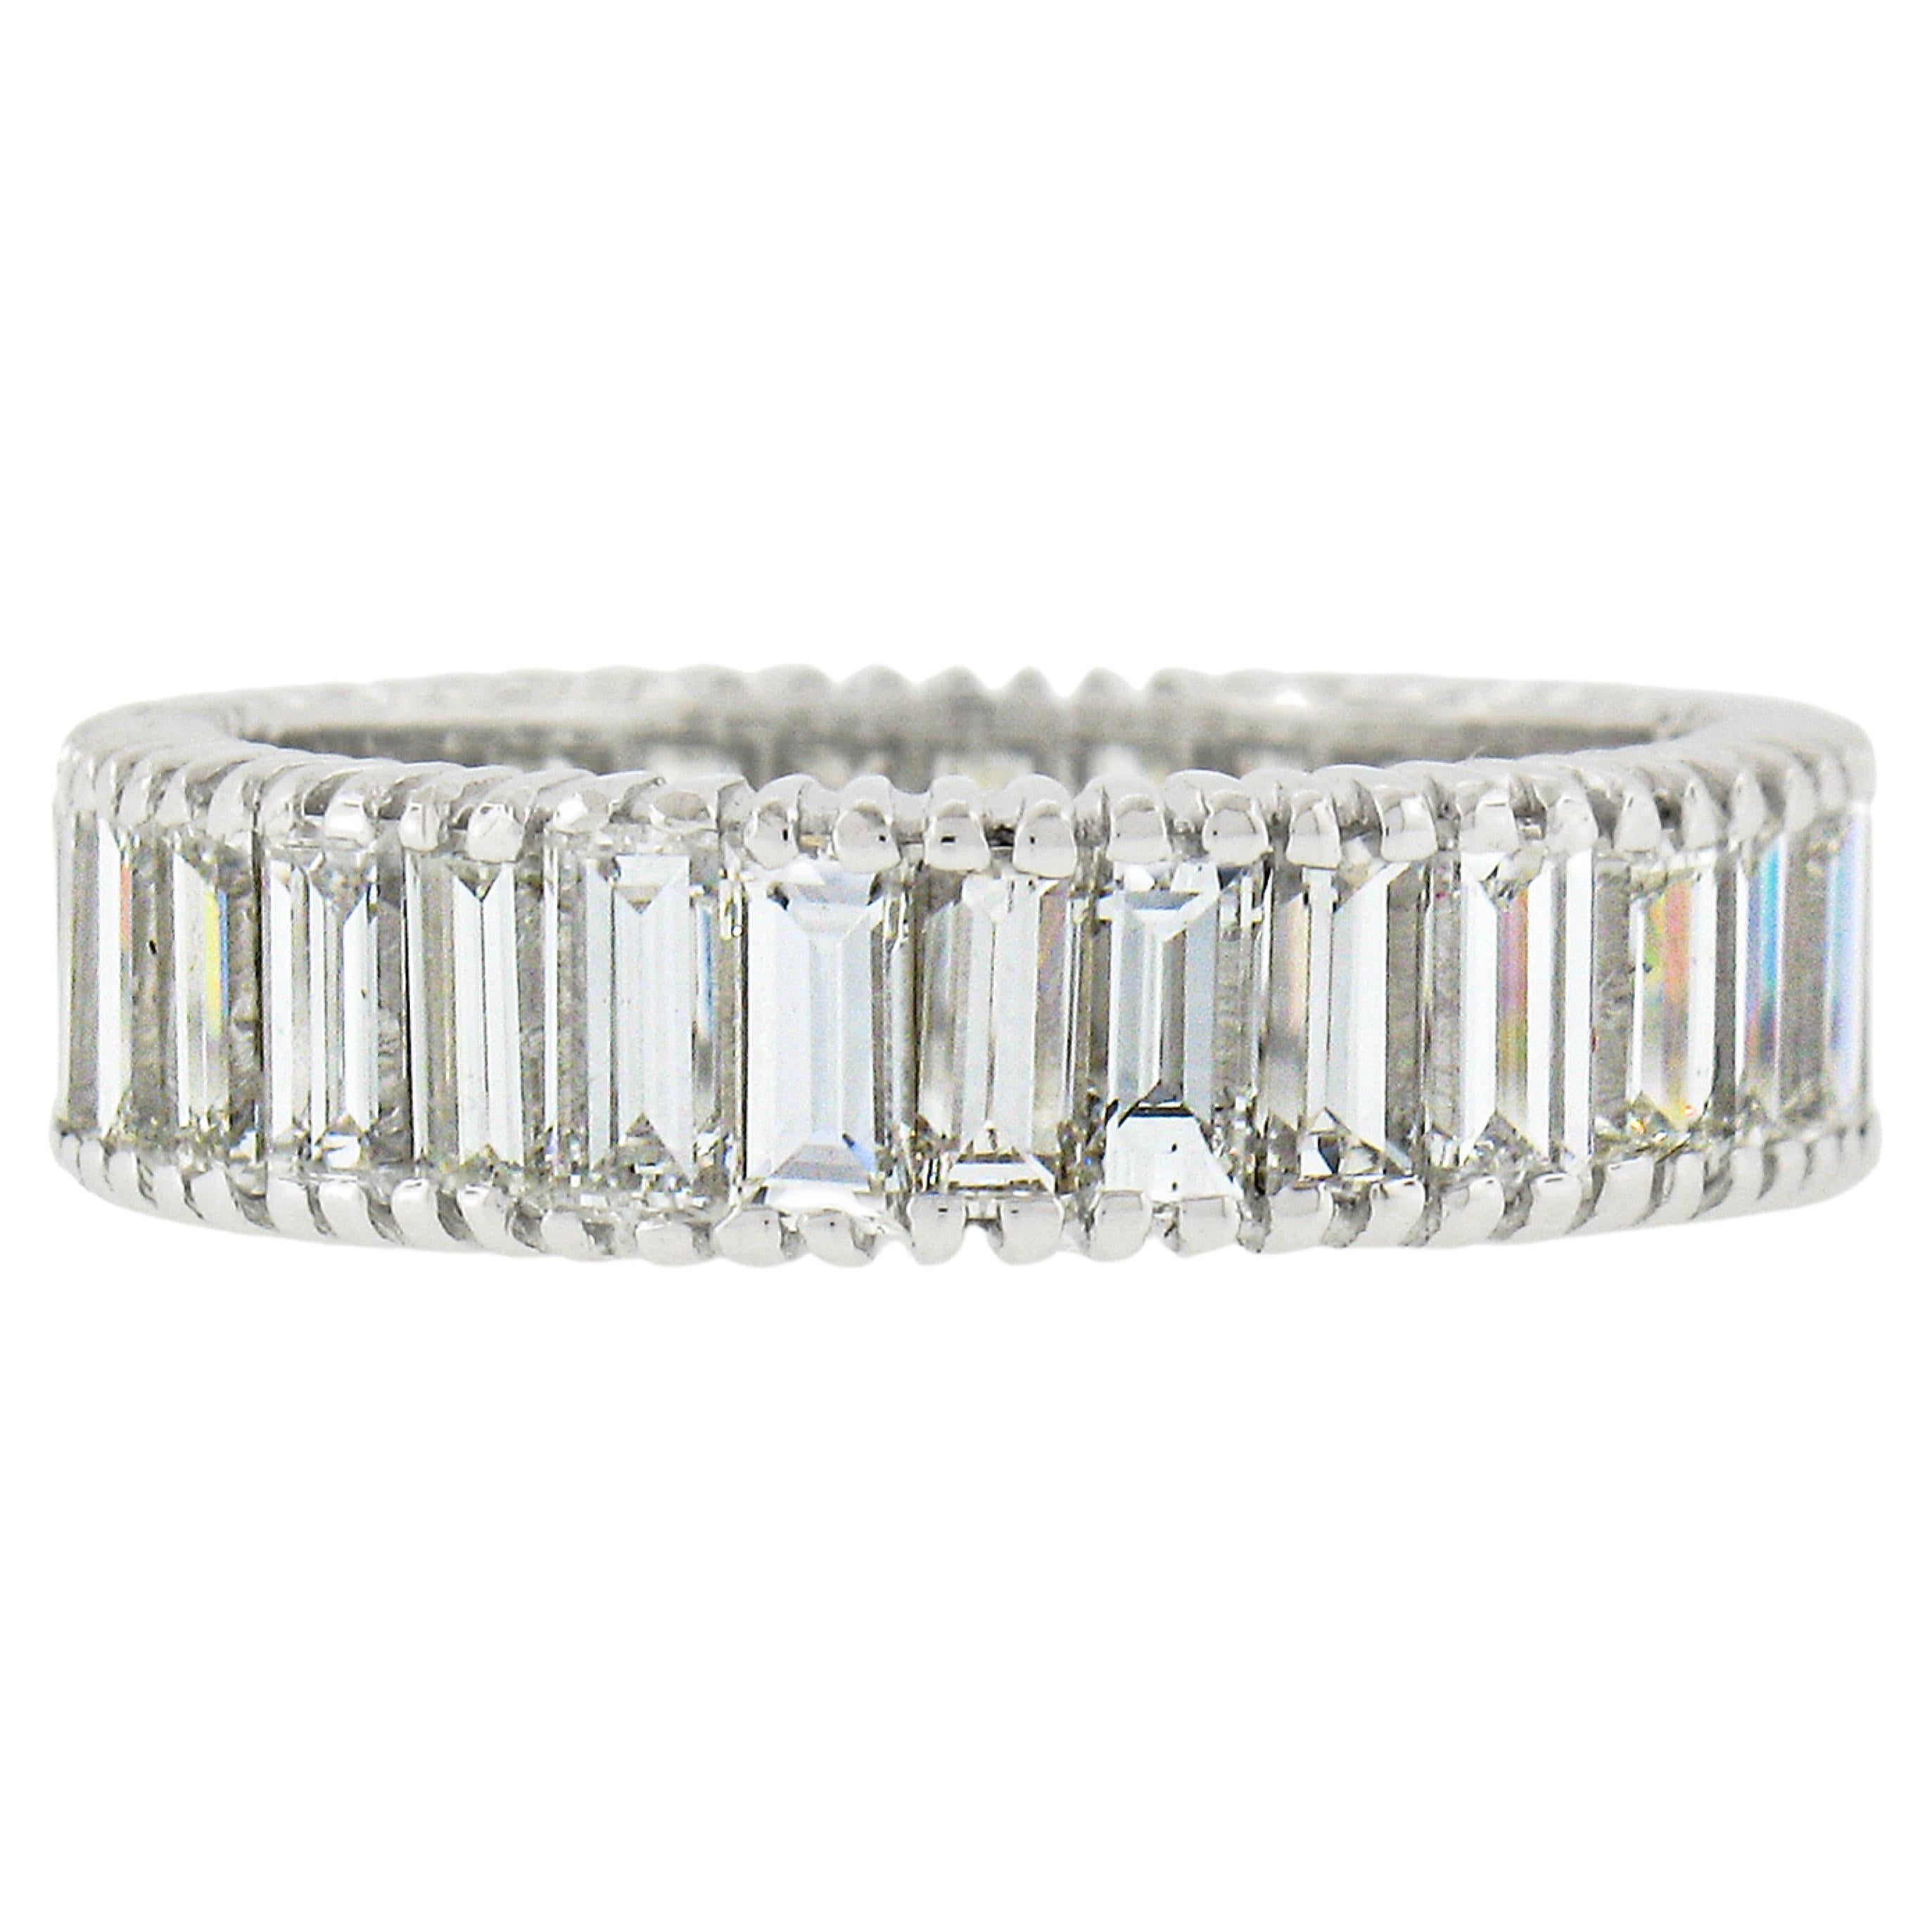 This absolutely stunning and very well made vintage diamond eternity band is crafted in solid platinum and features very fine quality straight baguette cut diamonds neatly prong set entirely around the ring. The ring contains 31 diamonds which total